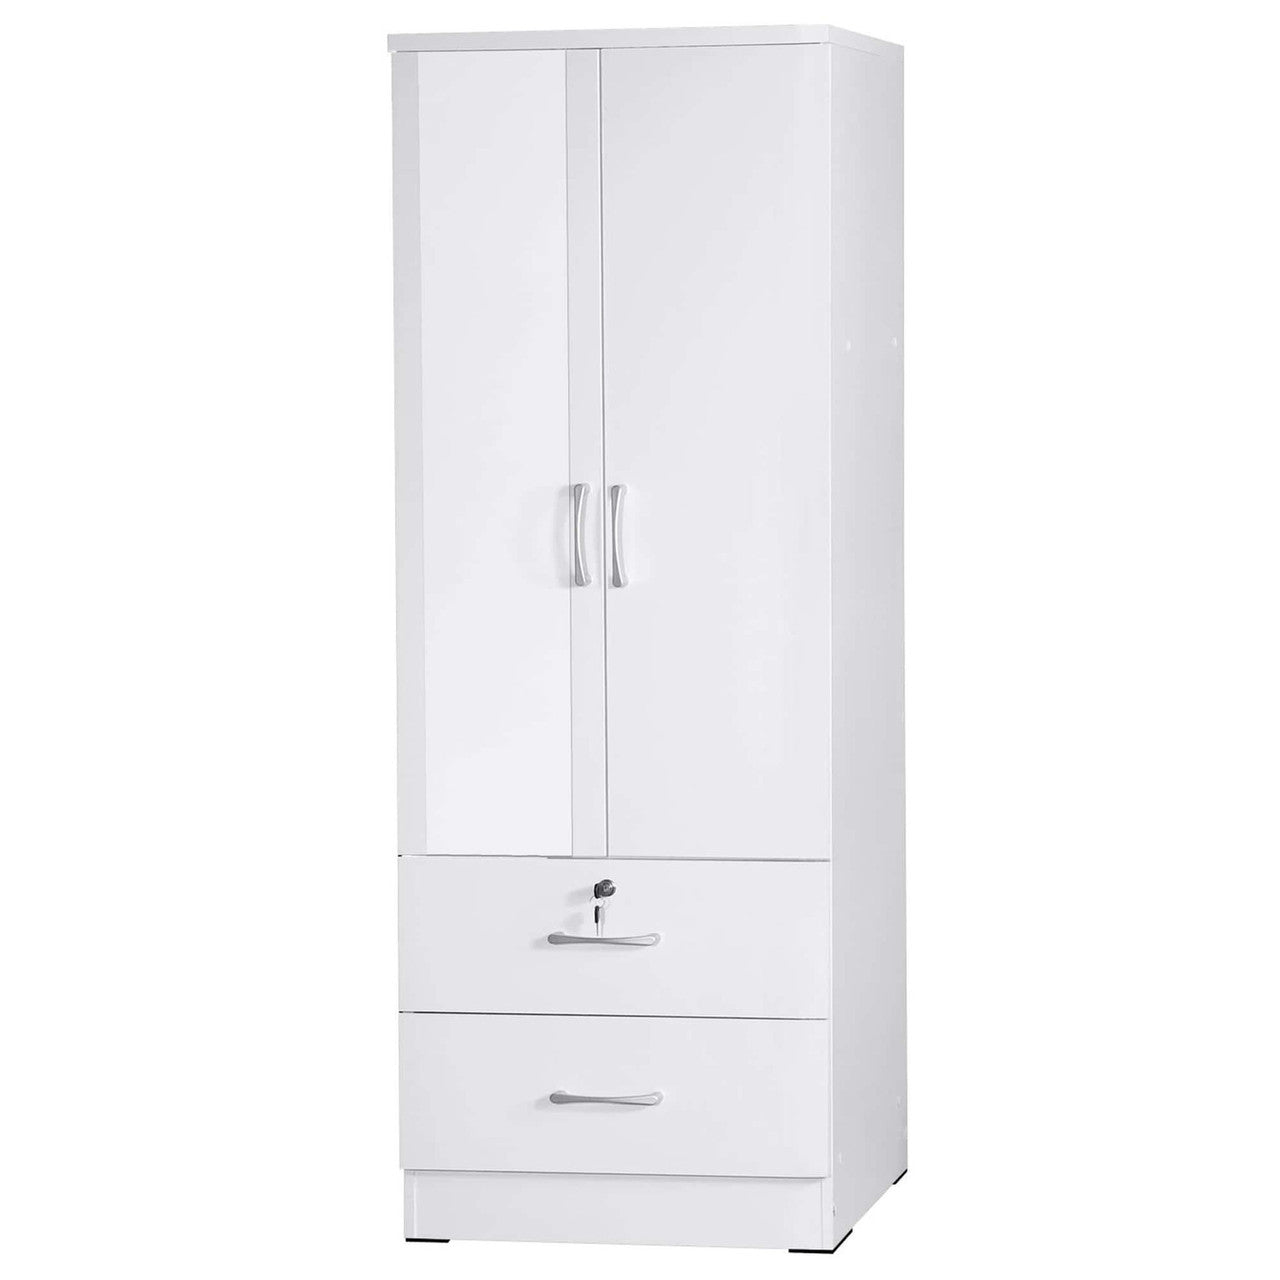 Go Green Woods Grace Armoire Wardrobe with Mirror & Drawers